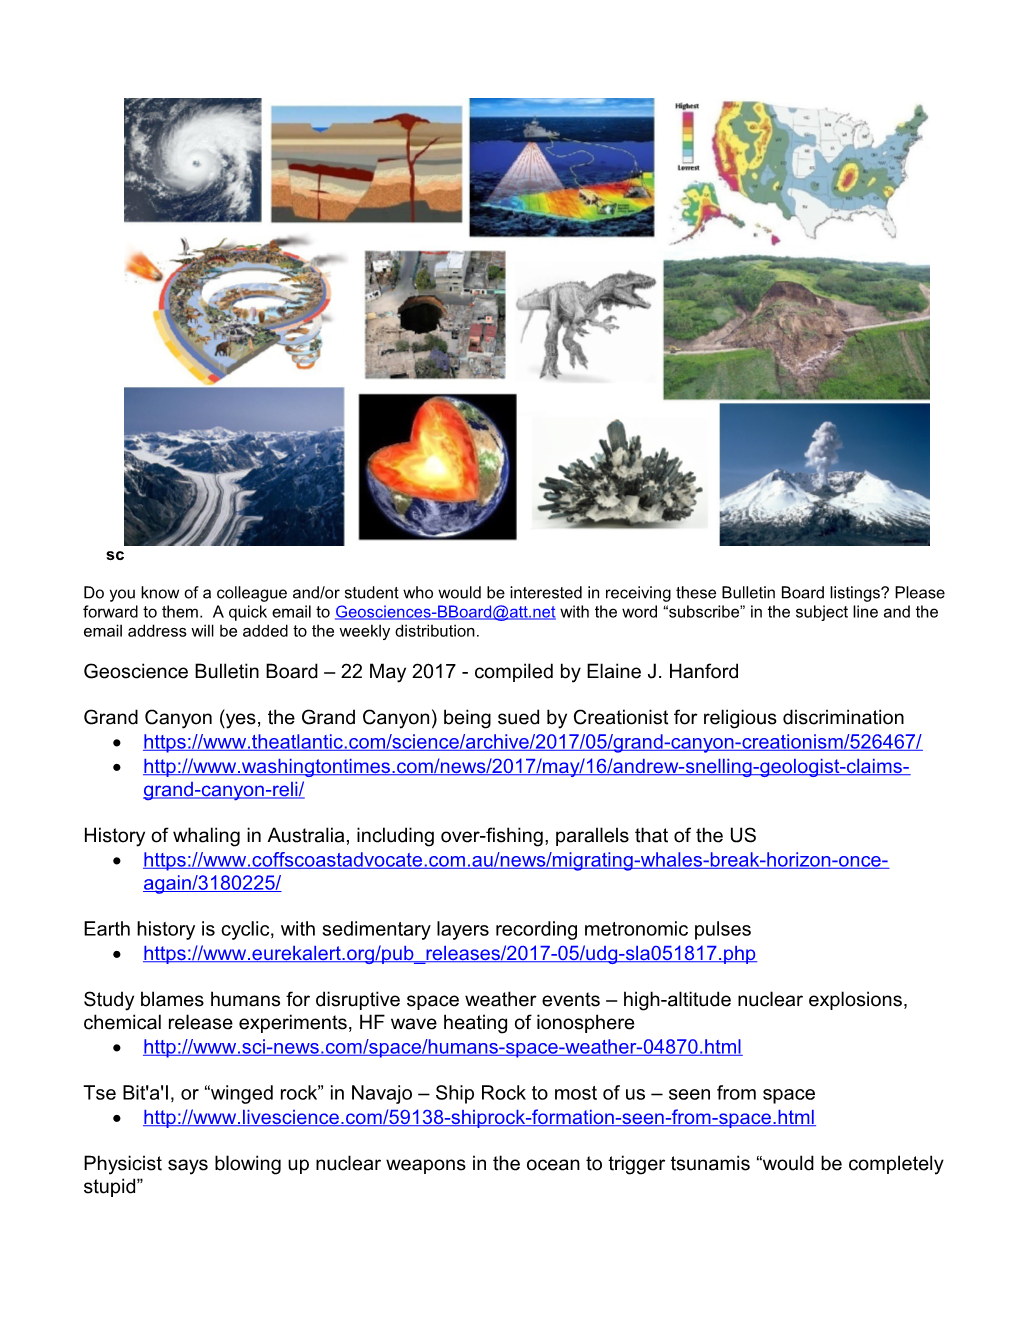 Geoscience Bulletin Board 22 May 2017- Compiled by Elaine J. Hanford